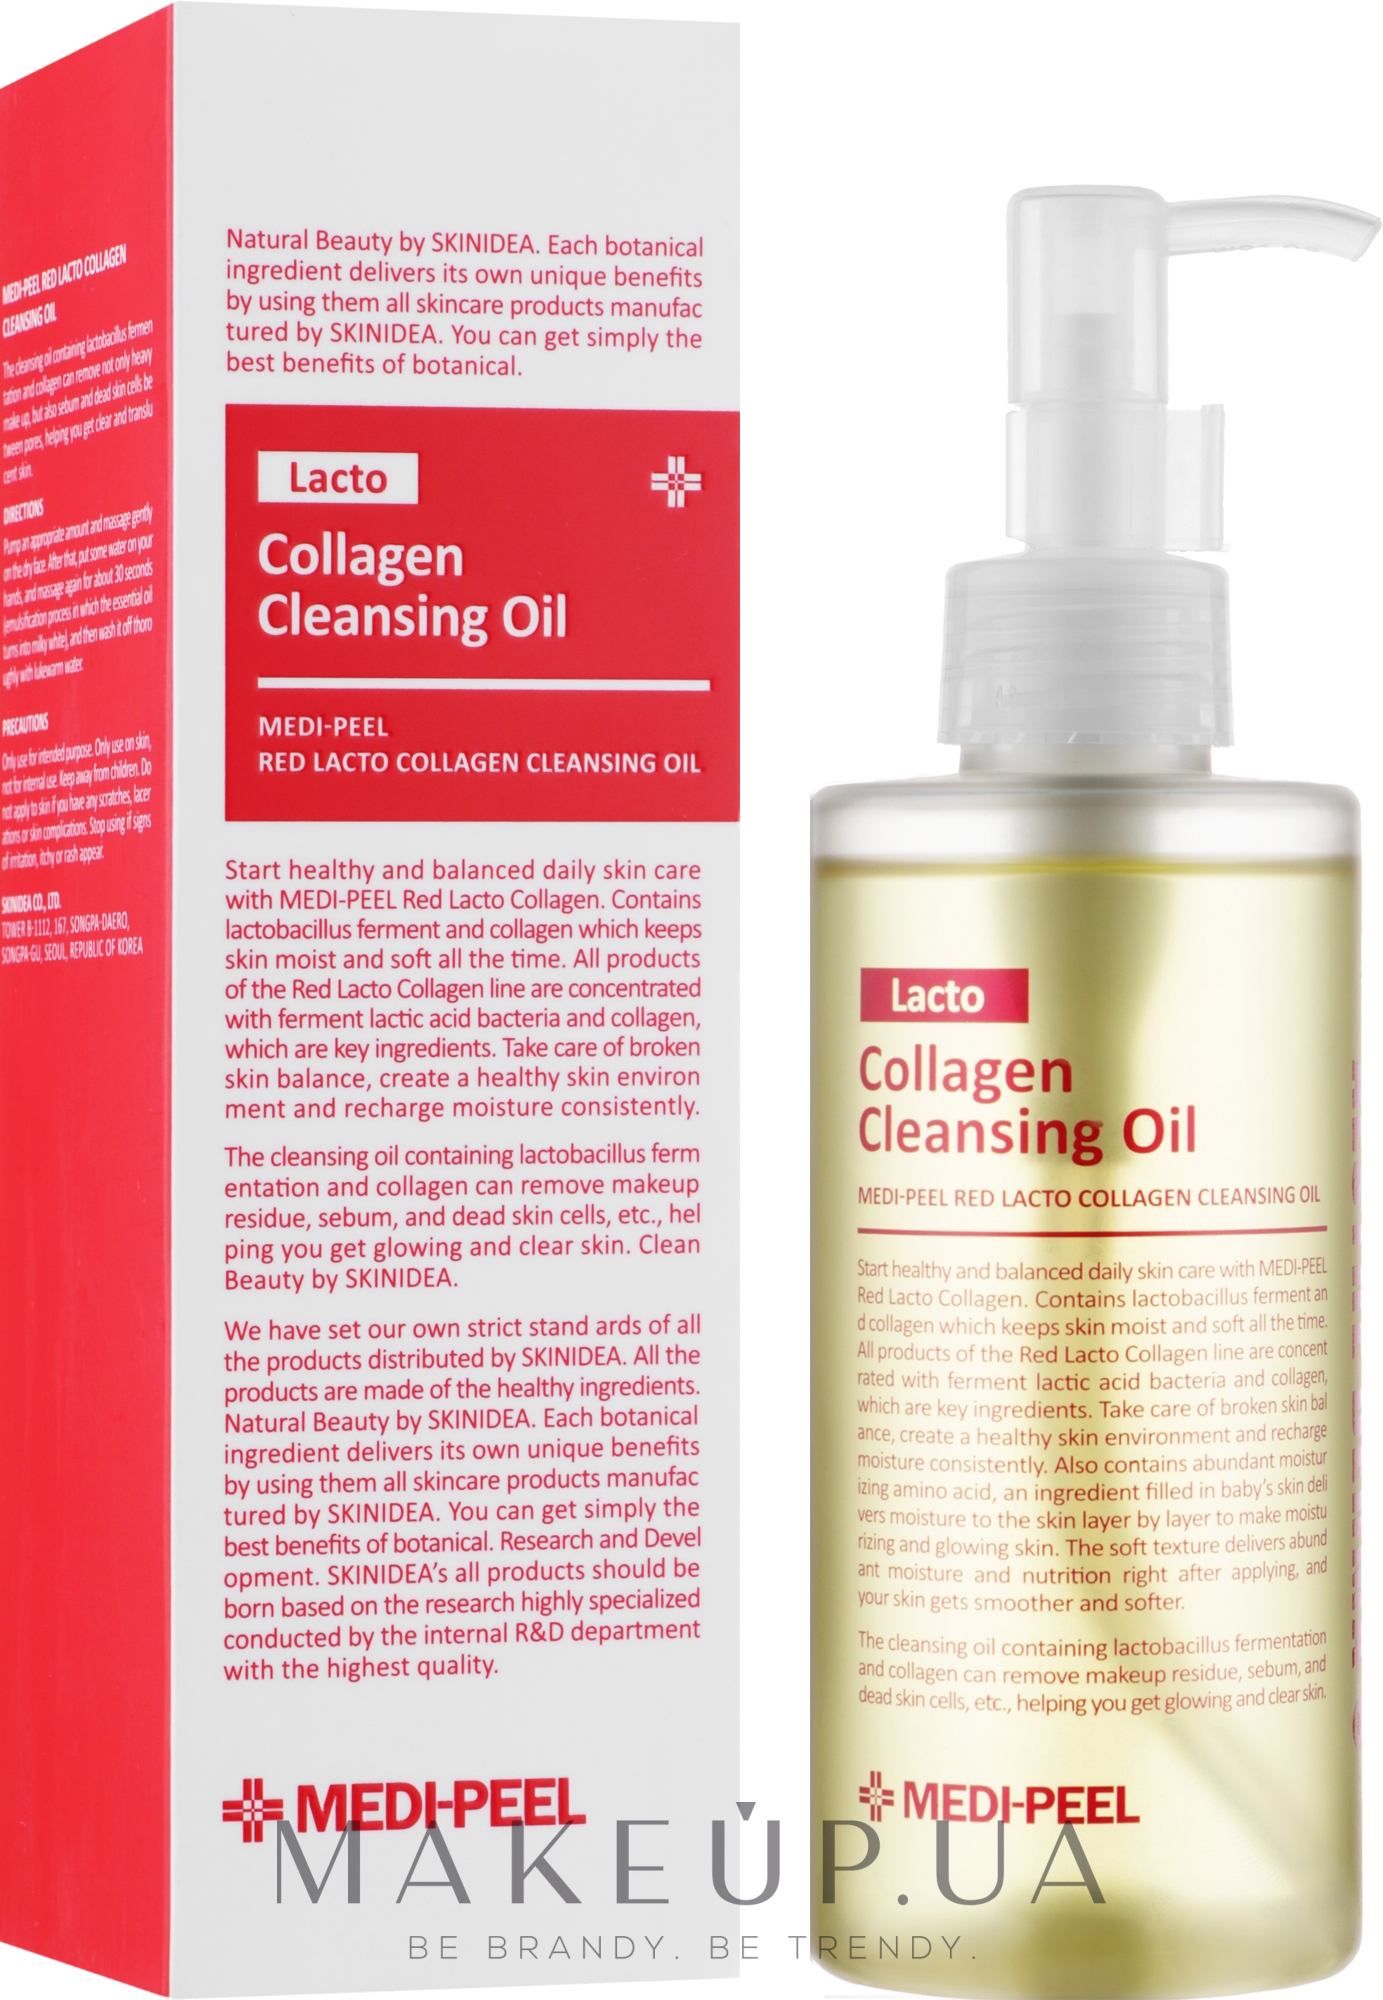 Medi Peel Red Lacto Collagen Cleansing Oil